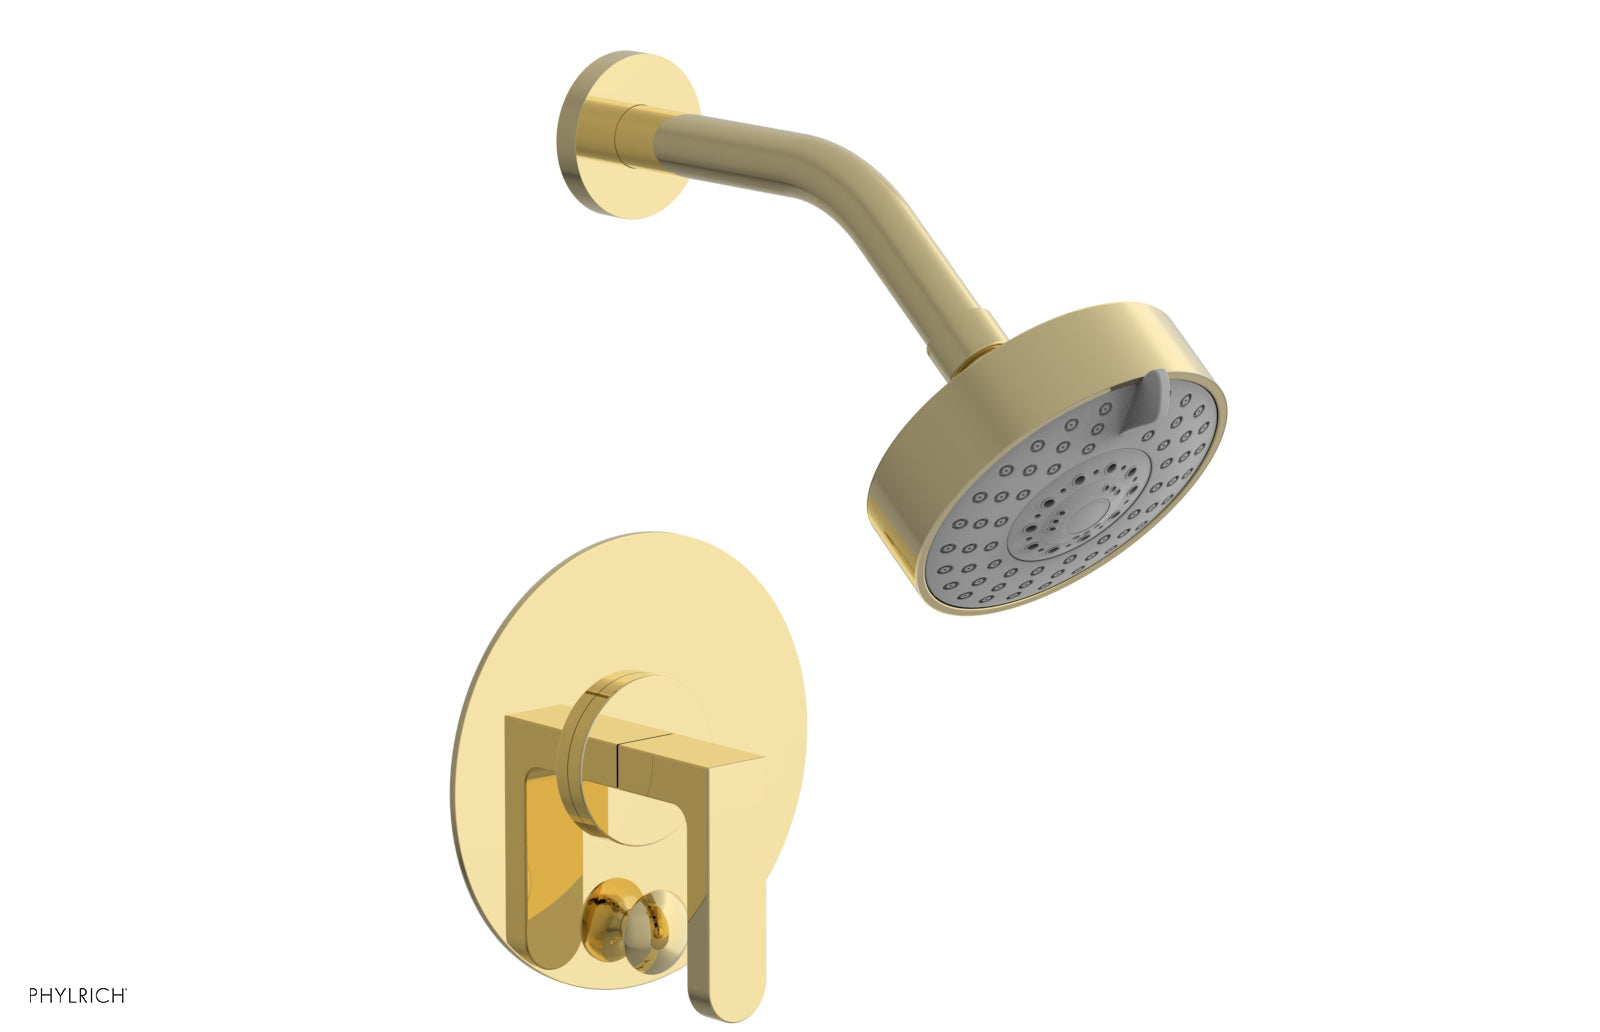 Phylrich ROND Pressure Balance Shower and Diverter Set (Less Spout), Lever Handle